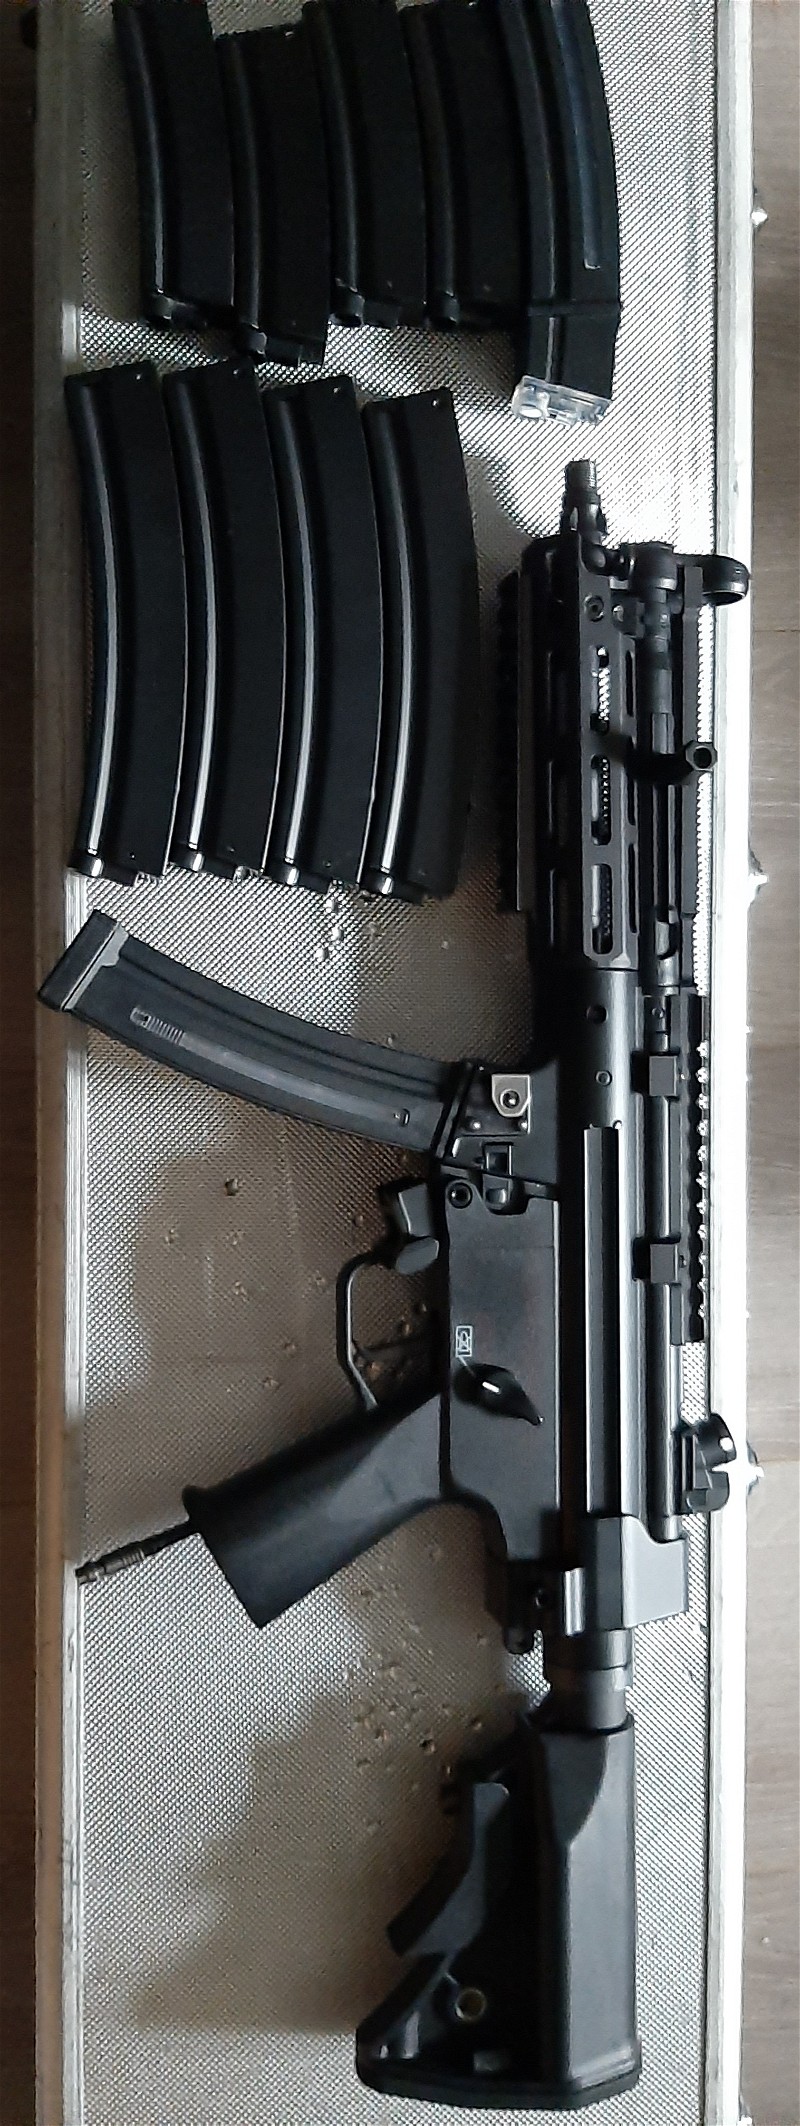 Image 1 for Hpa mp5 met vele mags.